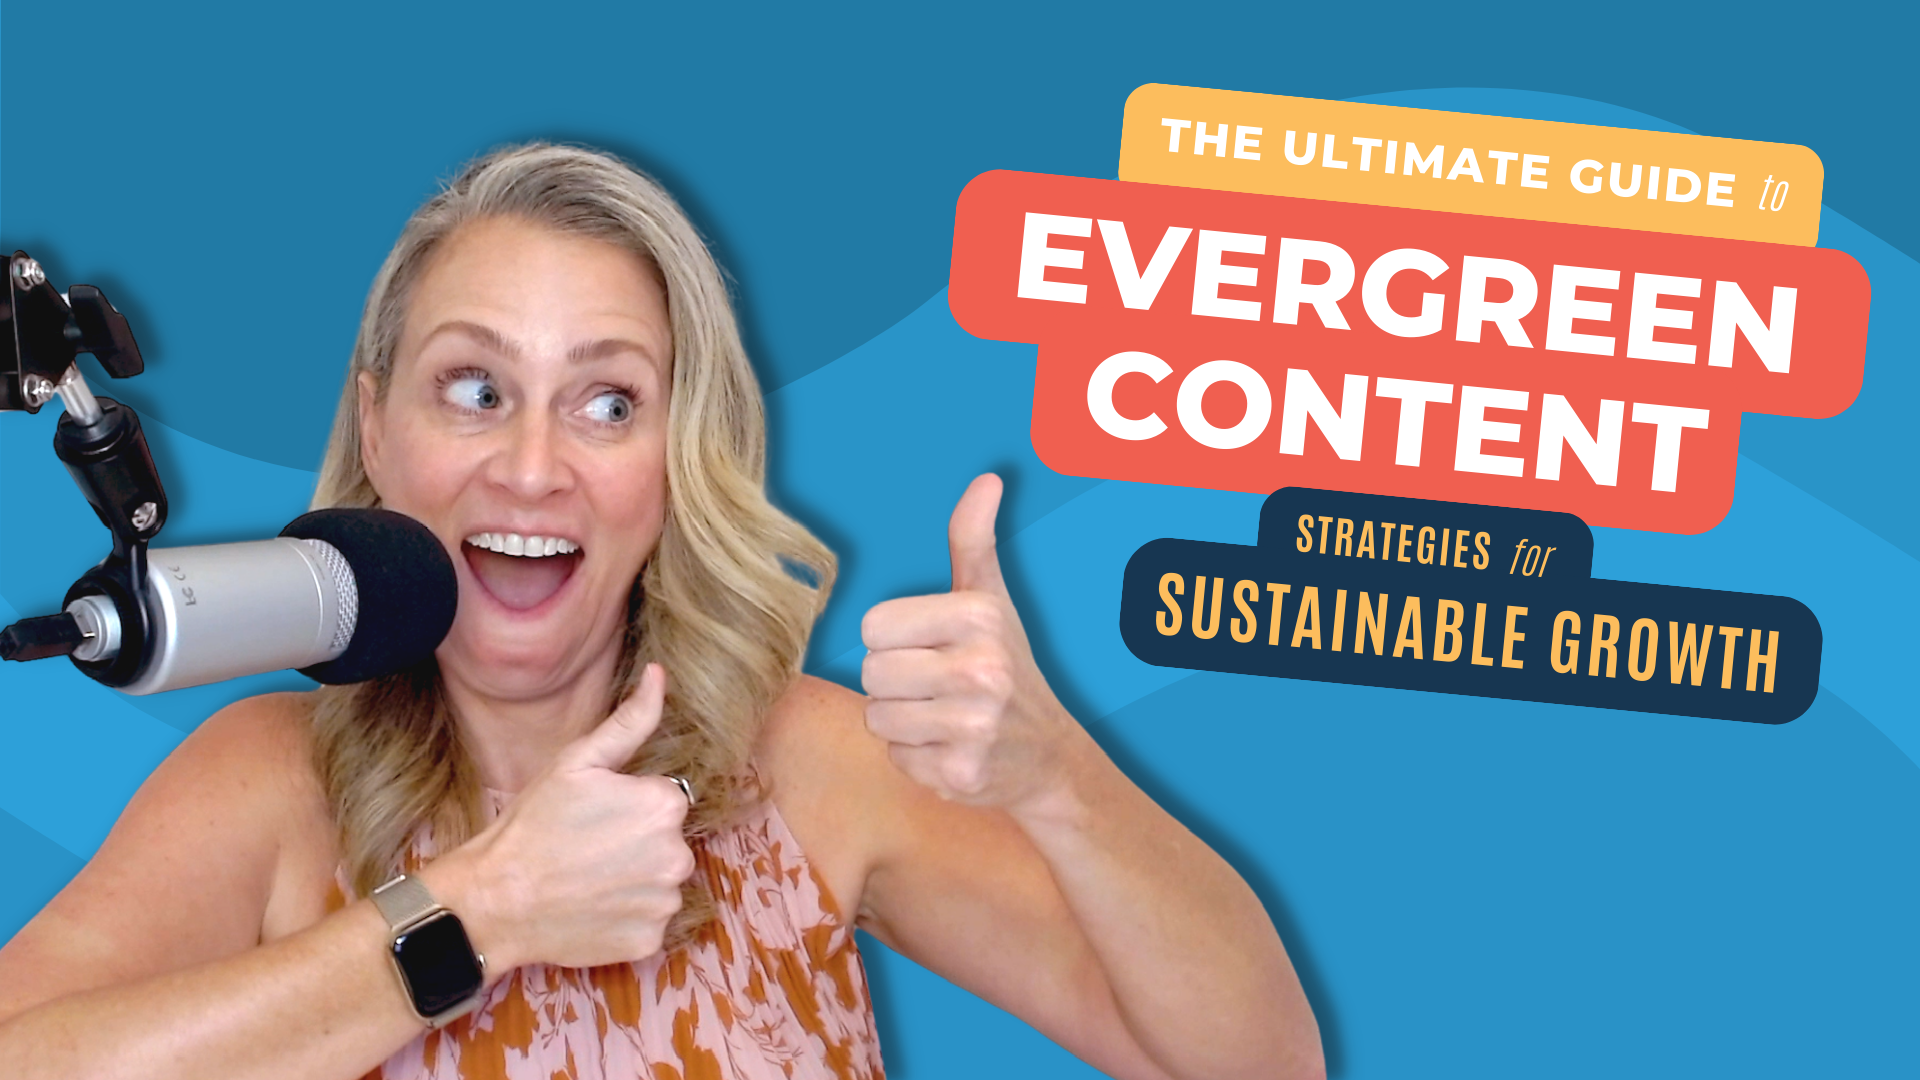 The Ultimate Guide to Evergreen Content: Strategies for Sustainable Growth